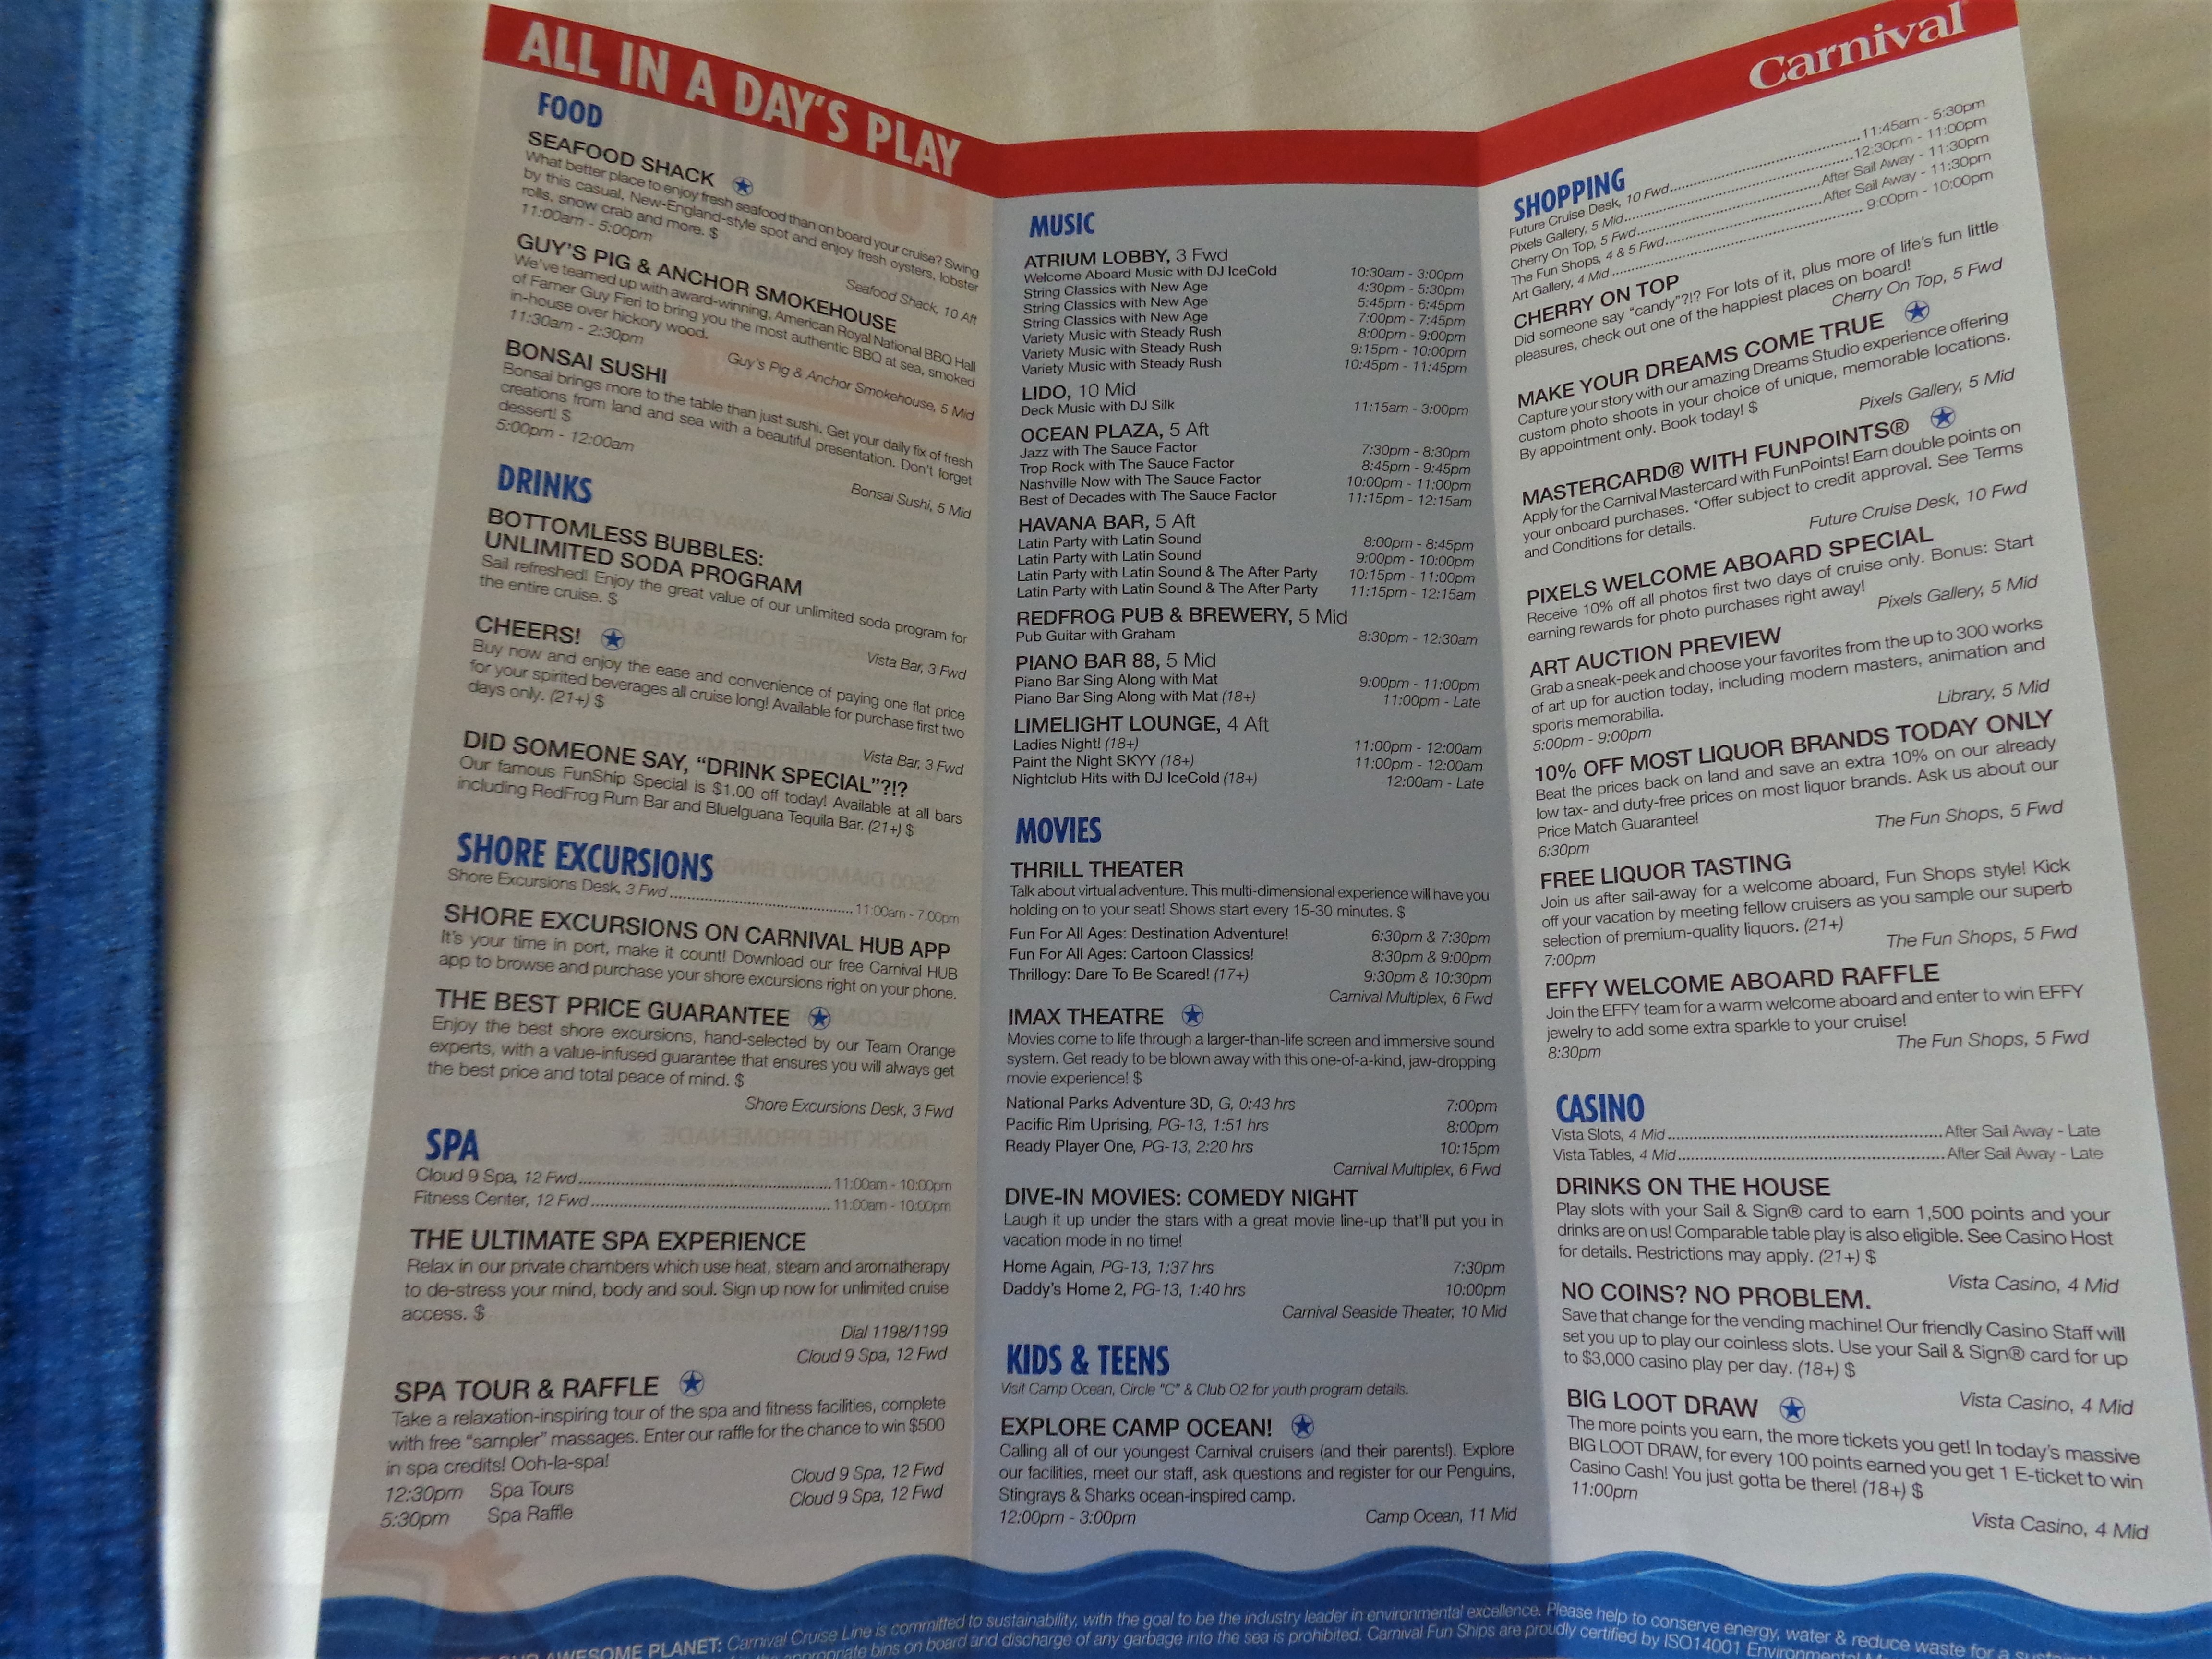 Carnival Vista Fun Times - List of daily activities on Carnival Cruises